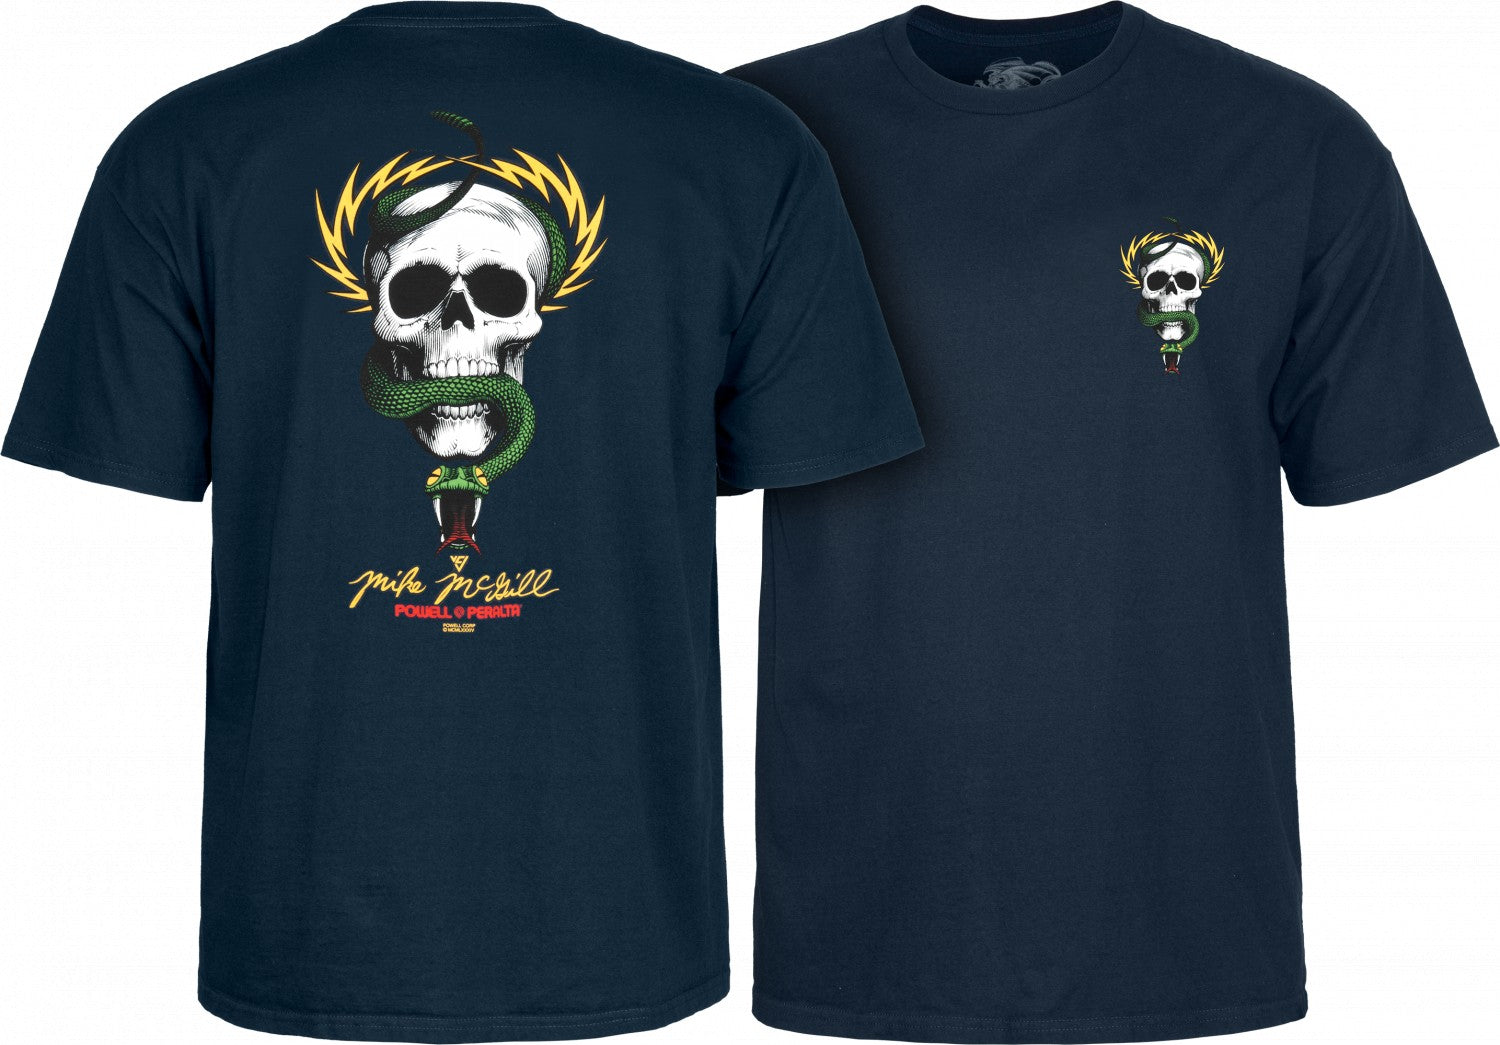 Powell Peralta Mike McGill Skull & Snake S/S Tee Navy X Large